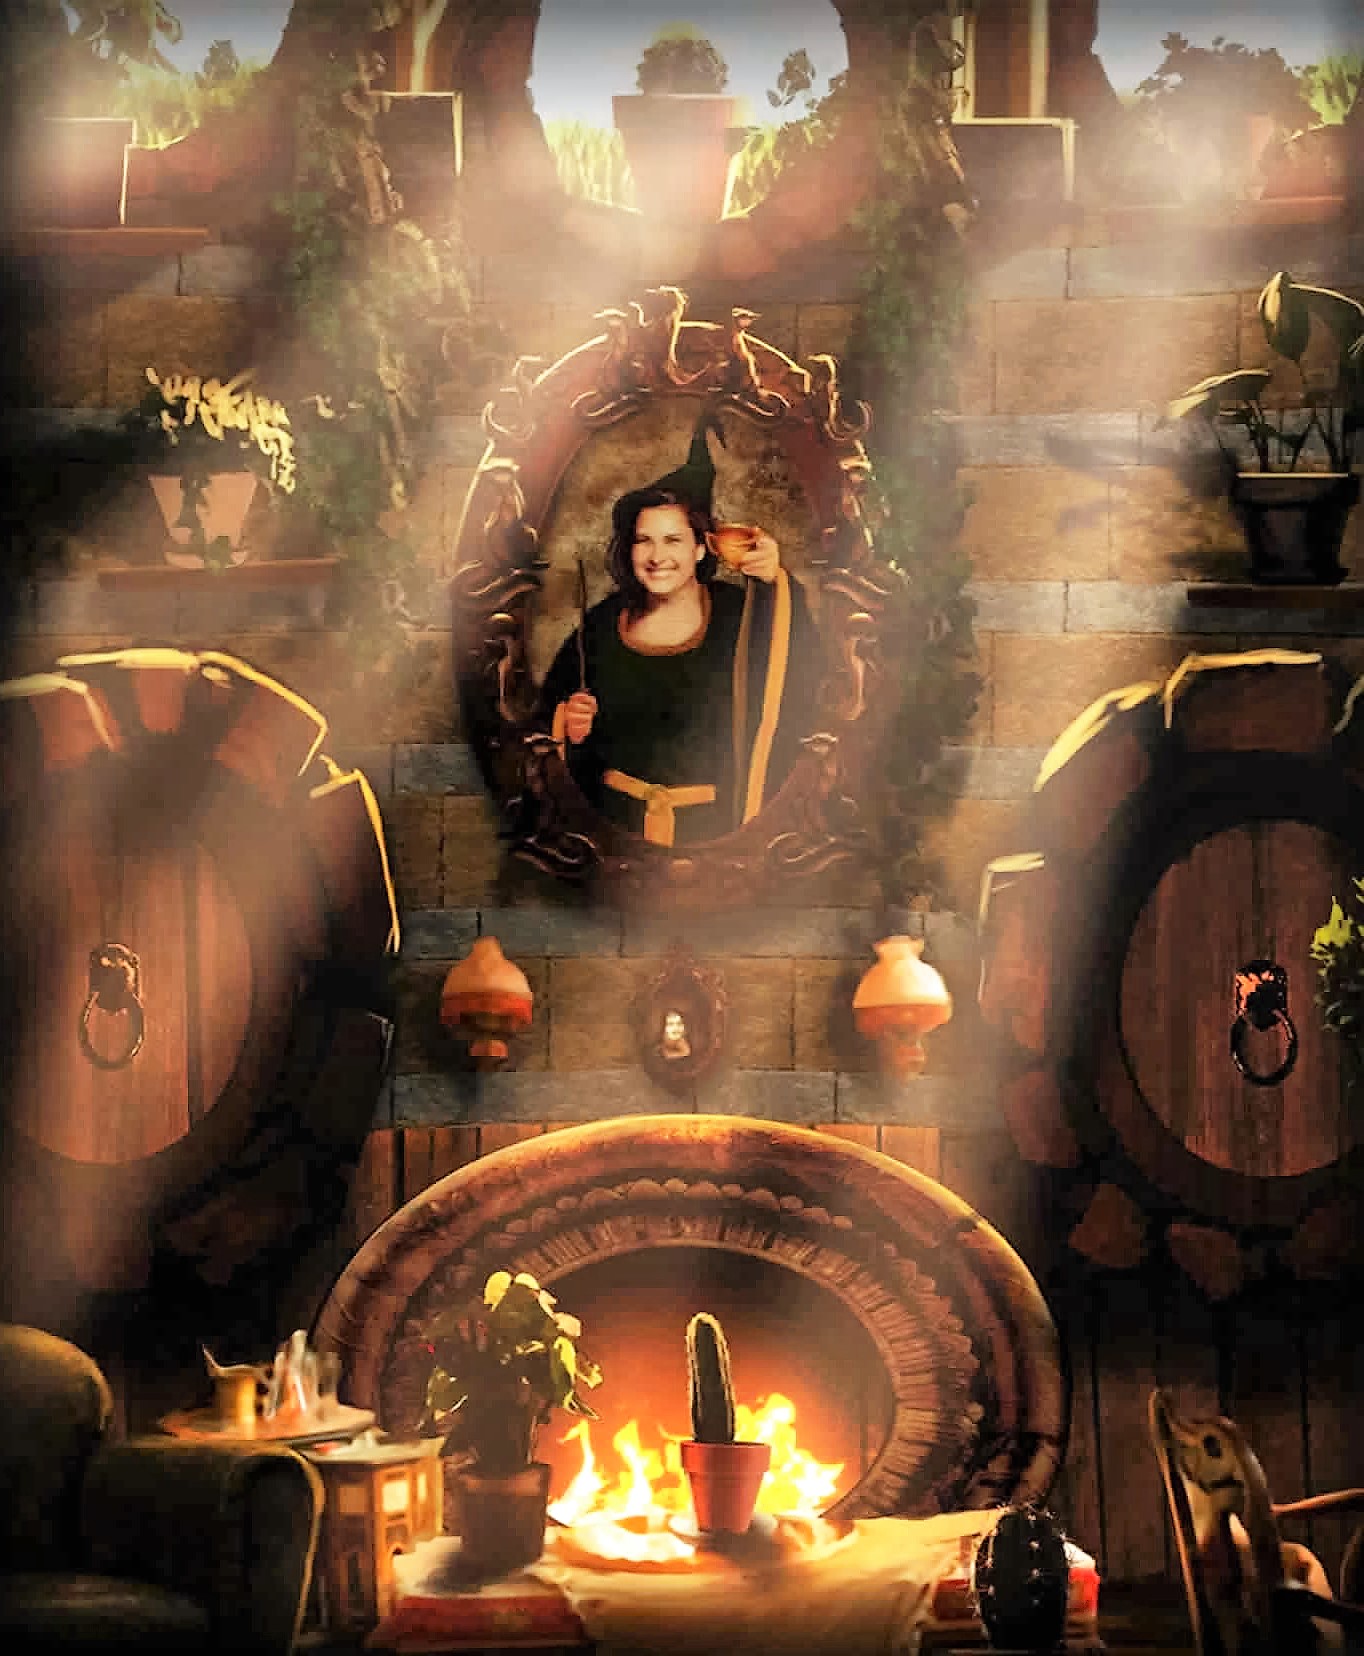 http://vignette3.wikia.nocookie.net/harrypotter/images/5/53/Hufflepuff_common_room.jpg/revision/latest?cb=20130427165937